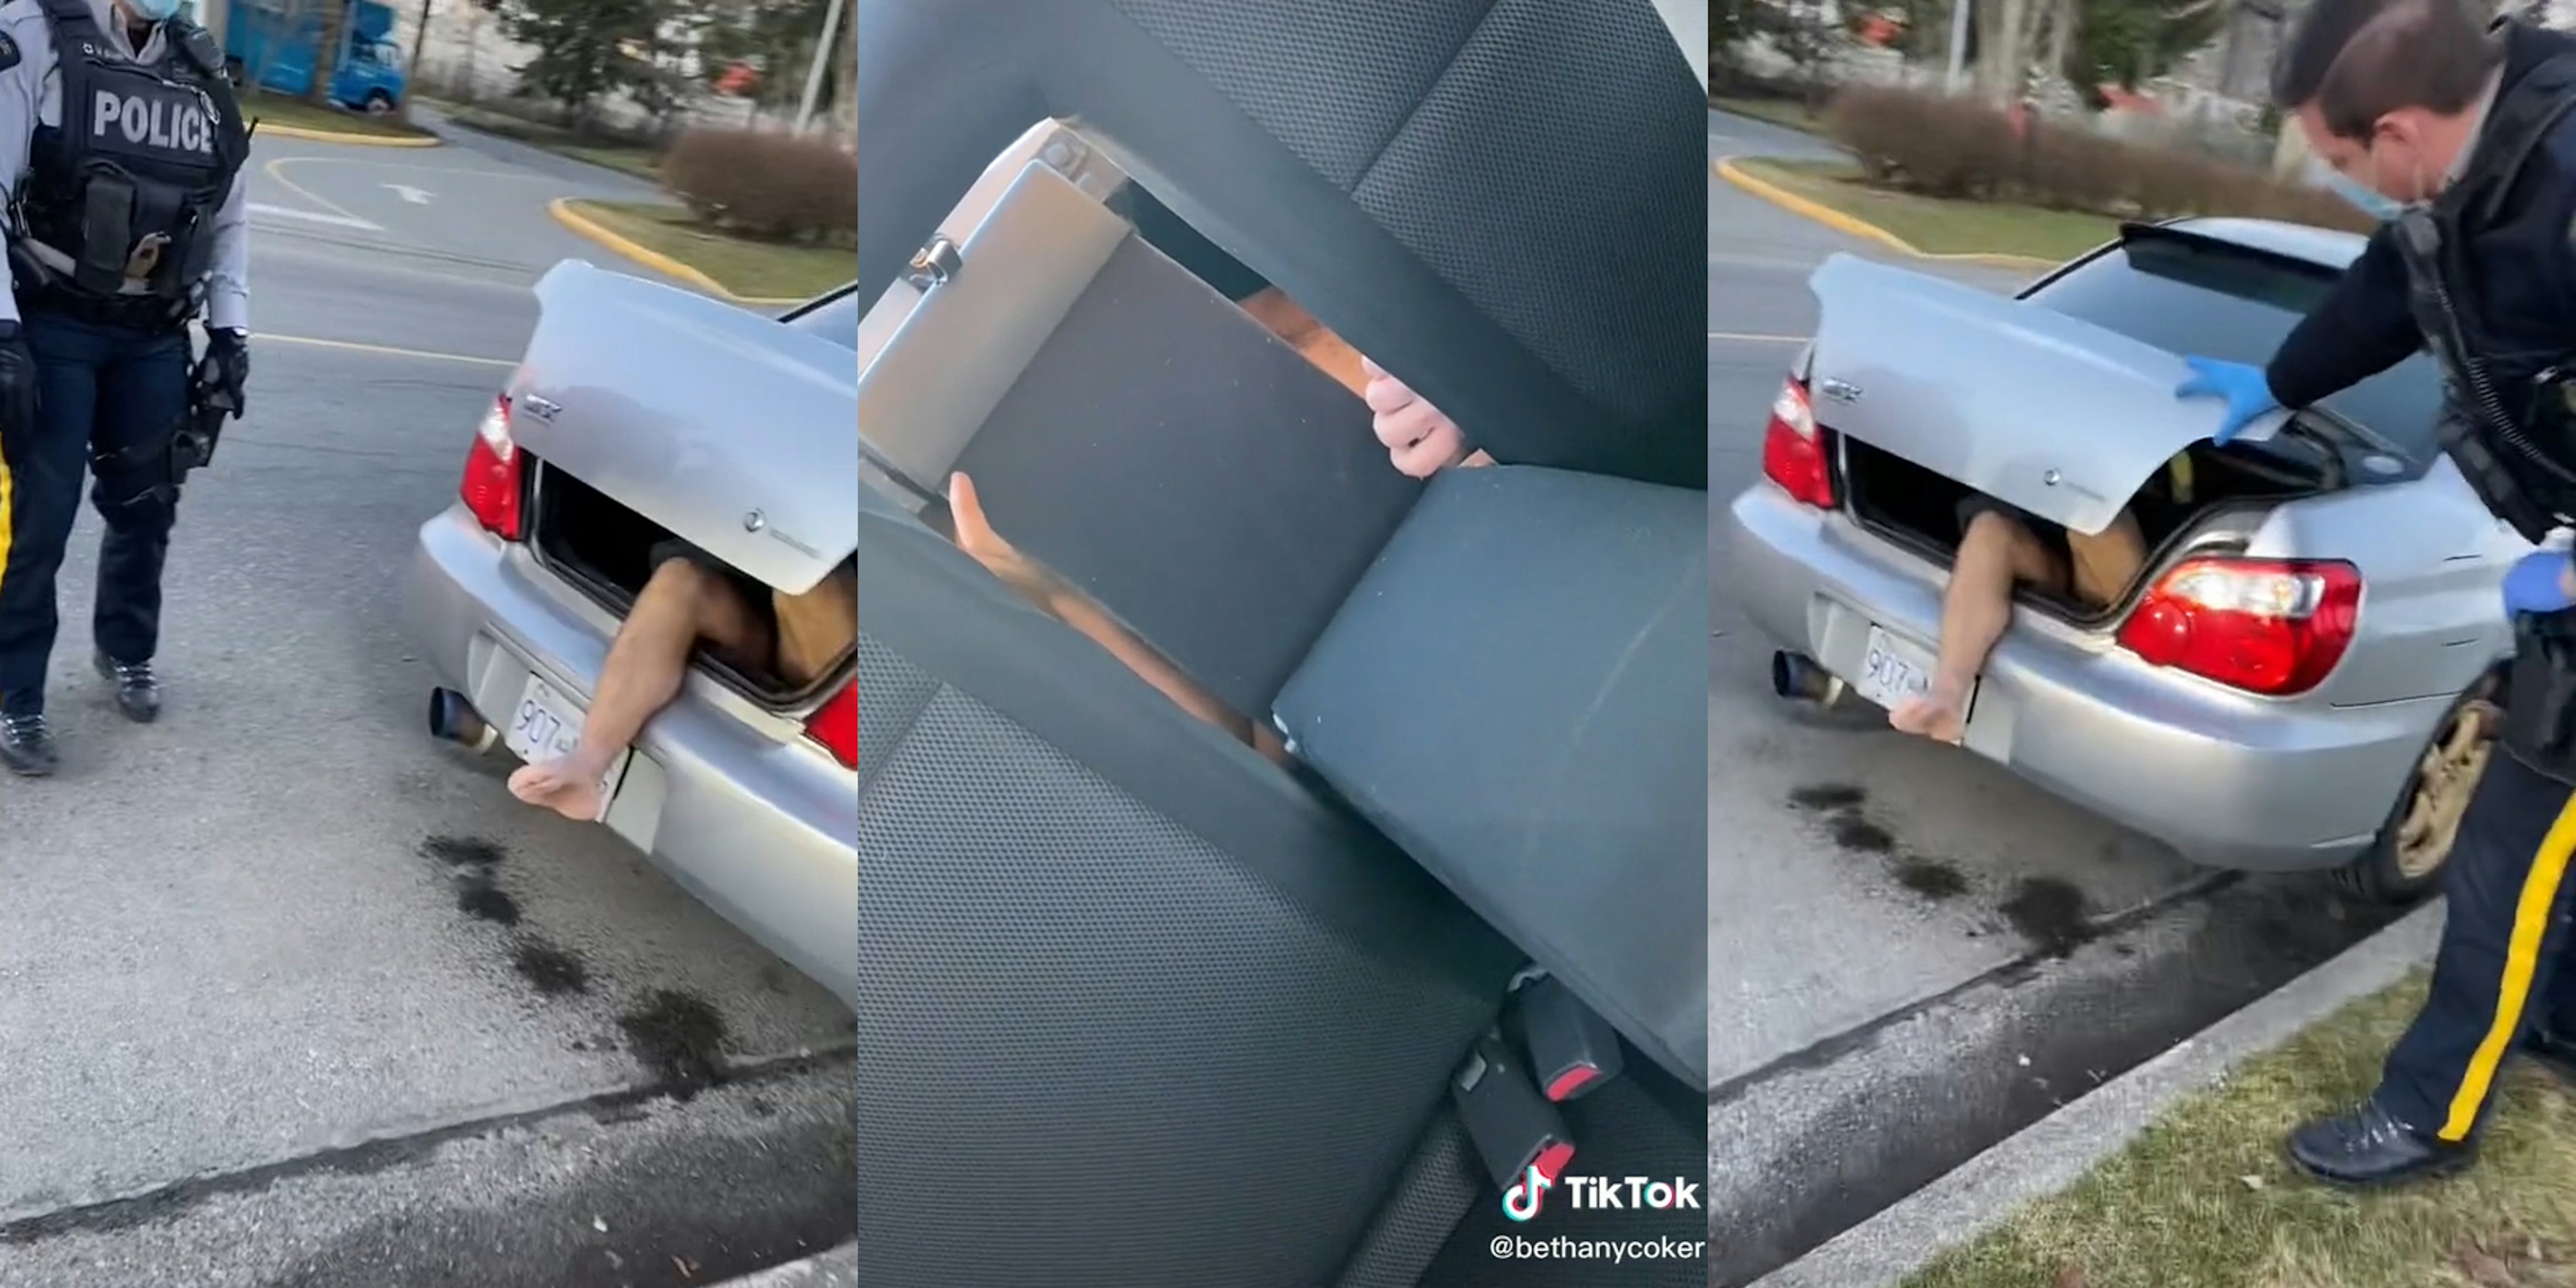 police approach trunk with man's legs sticking out (l & r) nude man in trunk hiding behind seat panel (c)